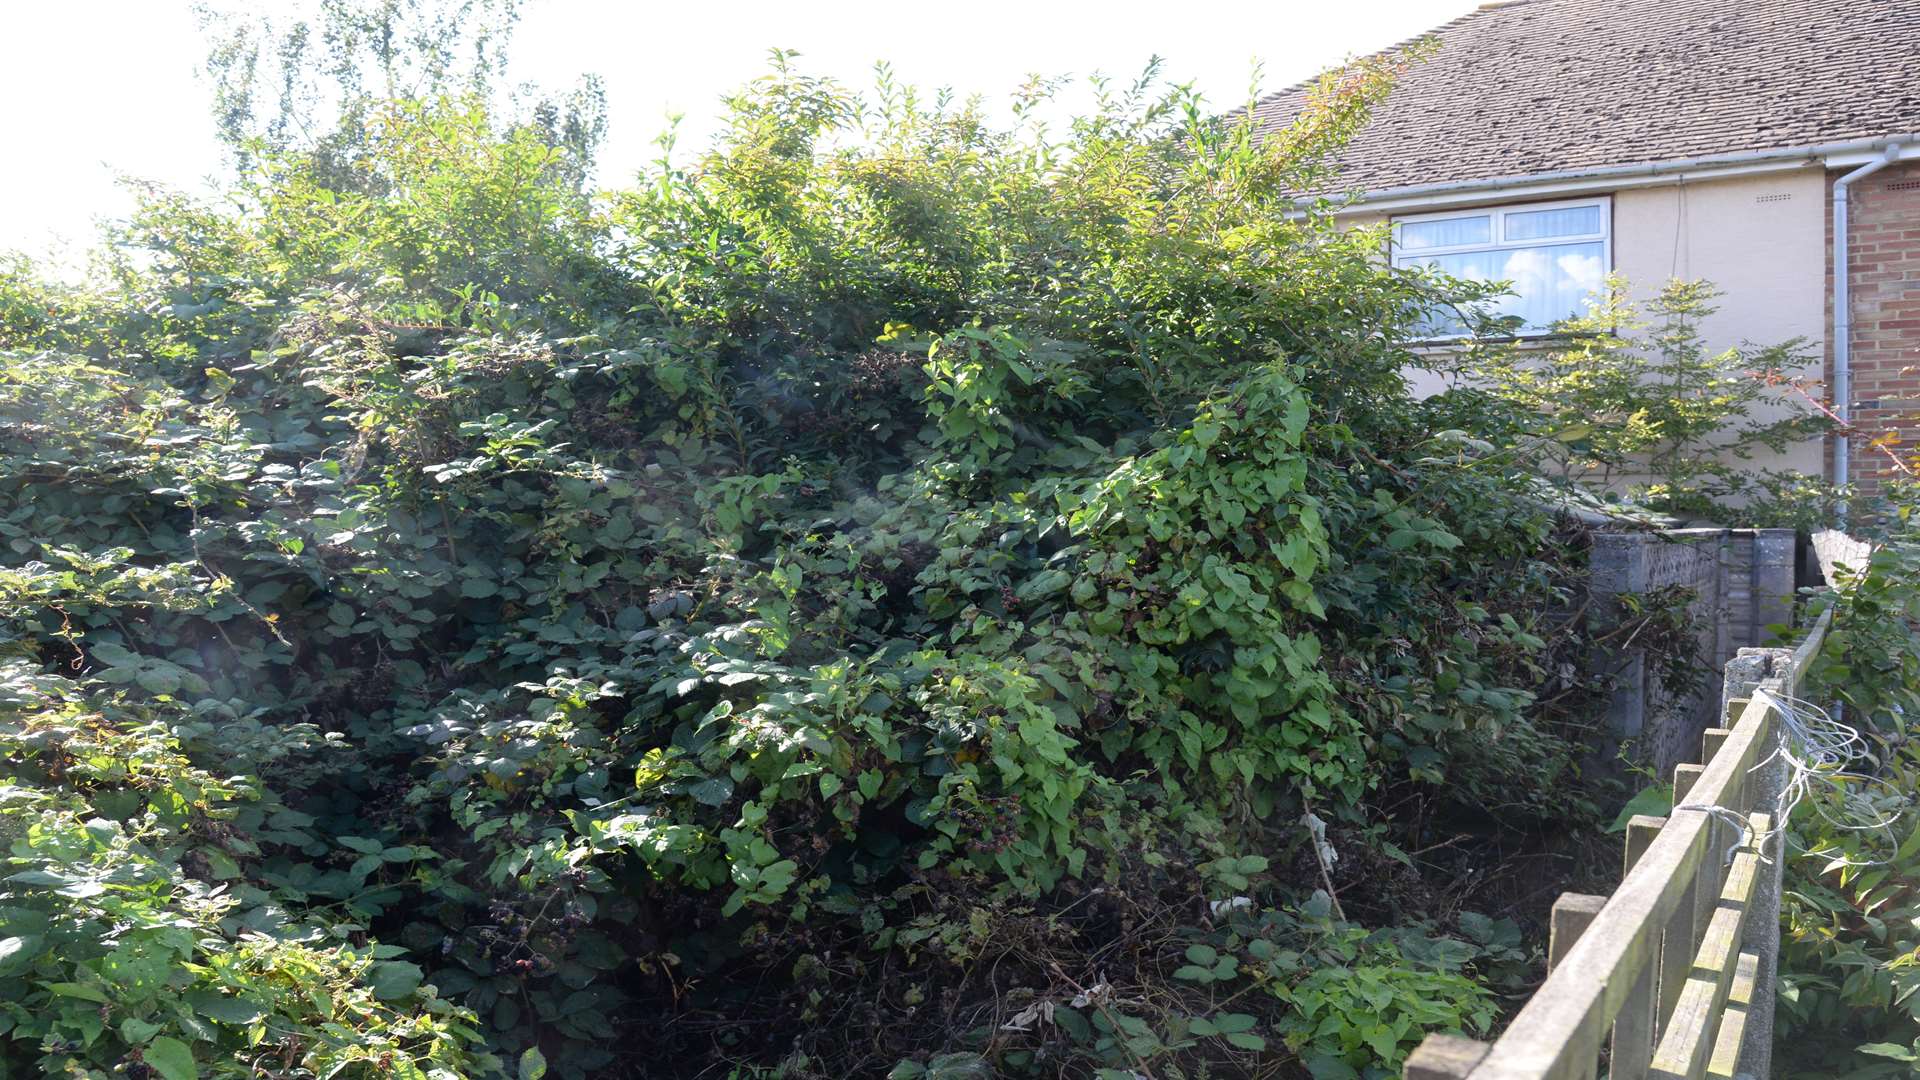 The plants reach almost the height of the house